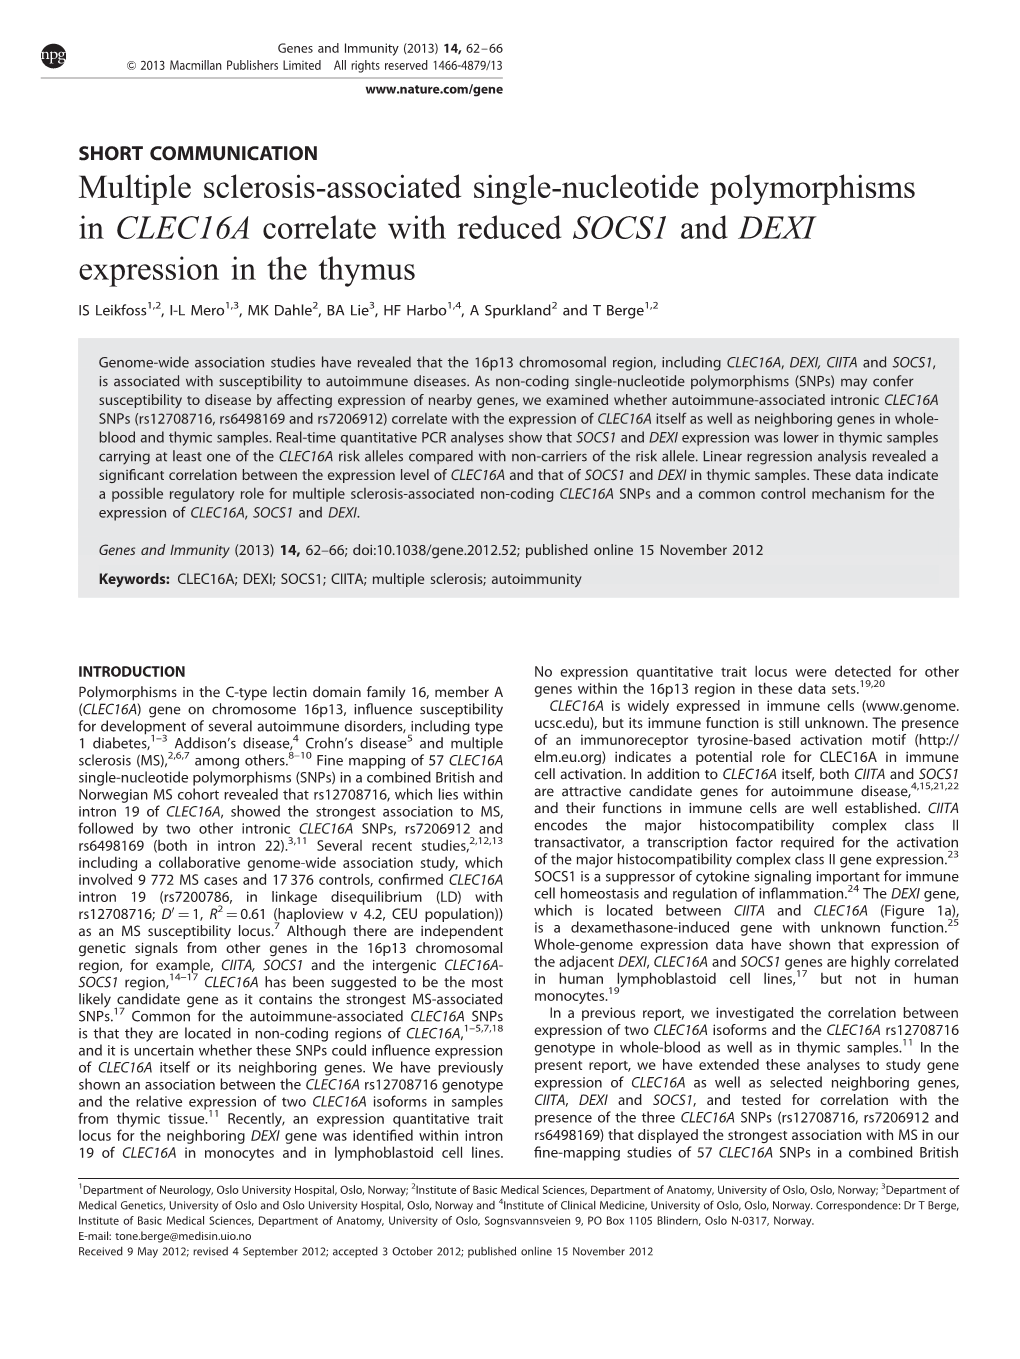 Multiple Sclerosis-Associated Single-Nucleotide Polymorphisms in CLEC16A Correlate with Reduced SOCS1 and DEXI Expression in the Thymus